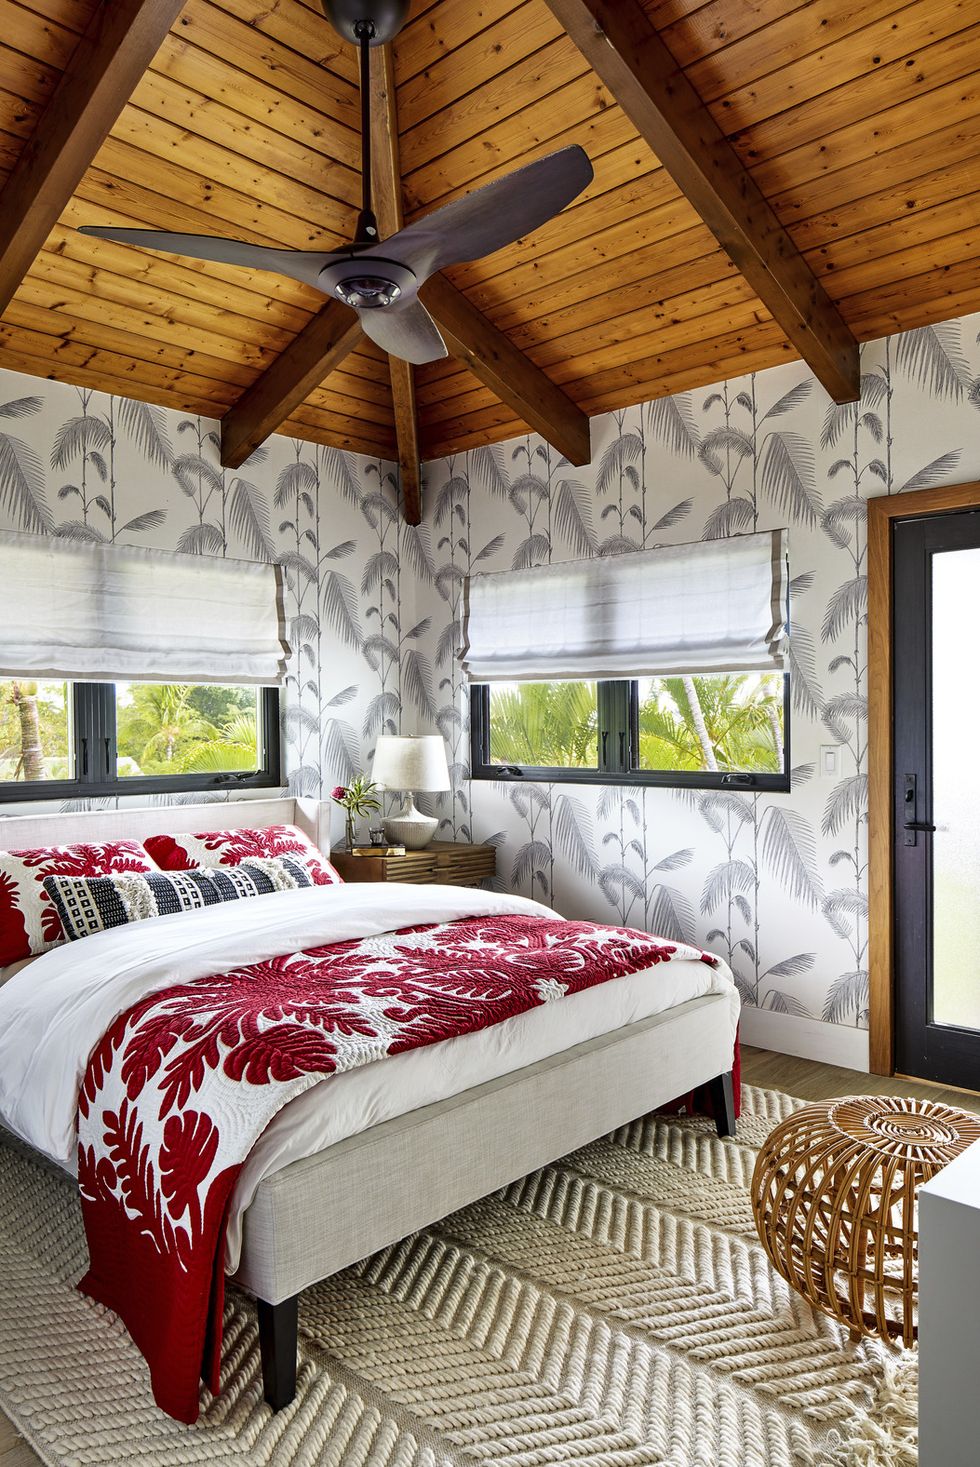 80 Stylish Bedroom Design Ideas, Decorating Tips, and Examples